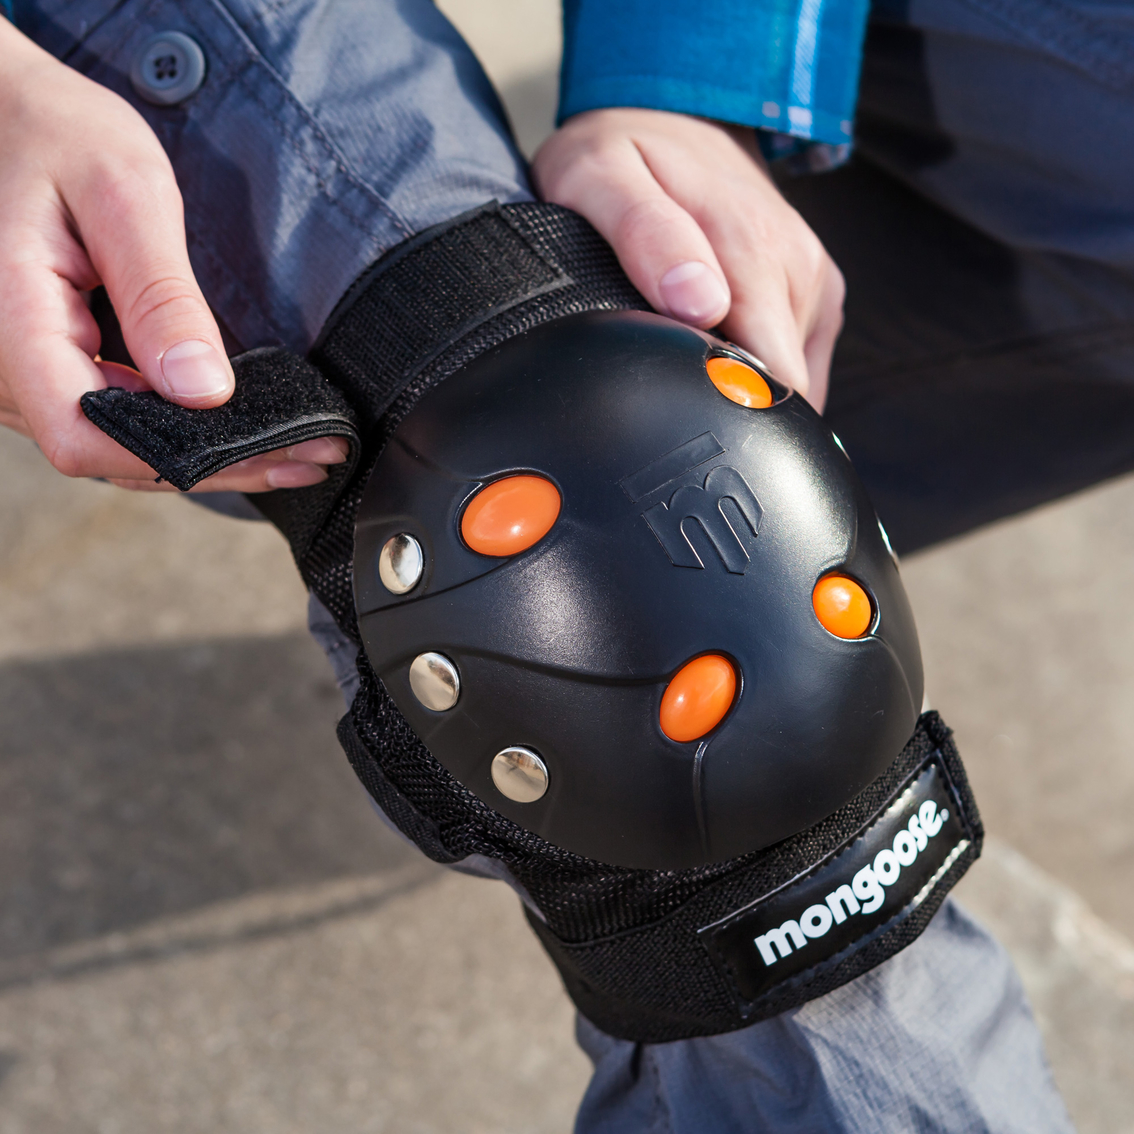 Mongoose Gel Knee and Elbow Pads - Image 3 of 5